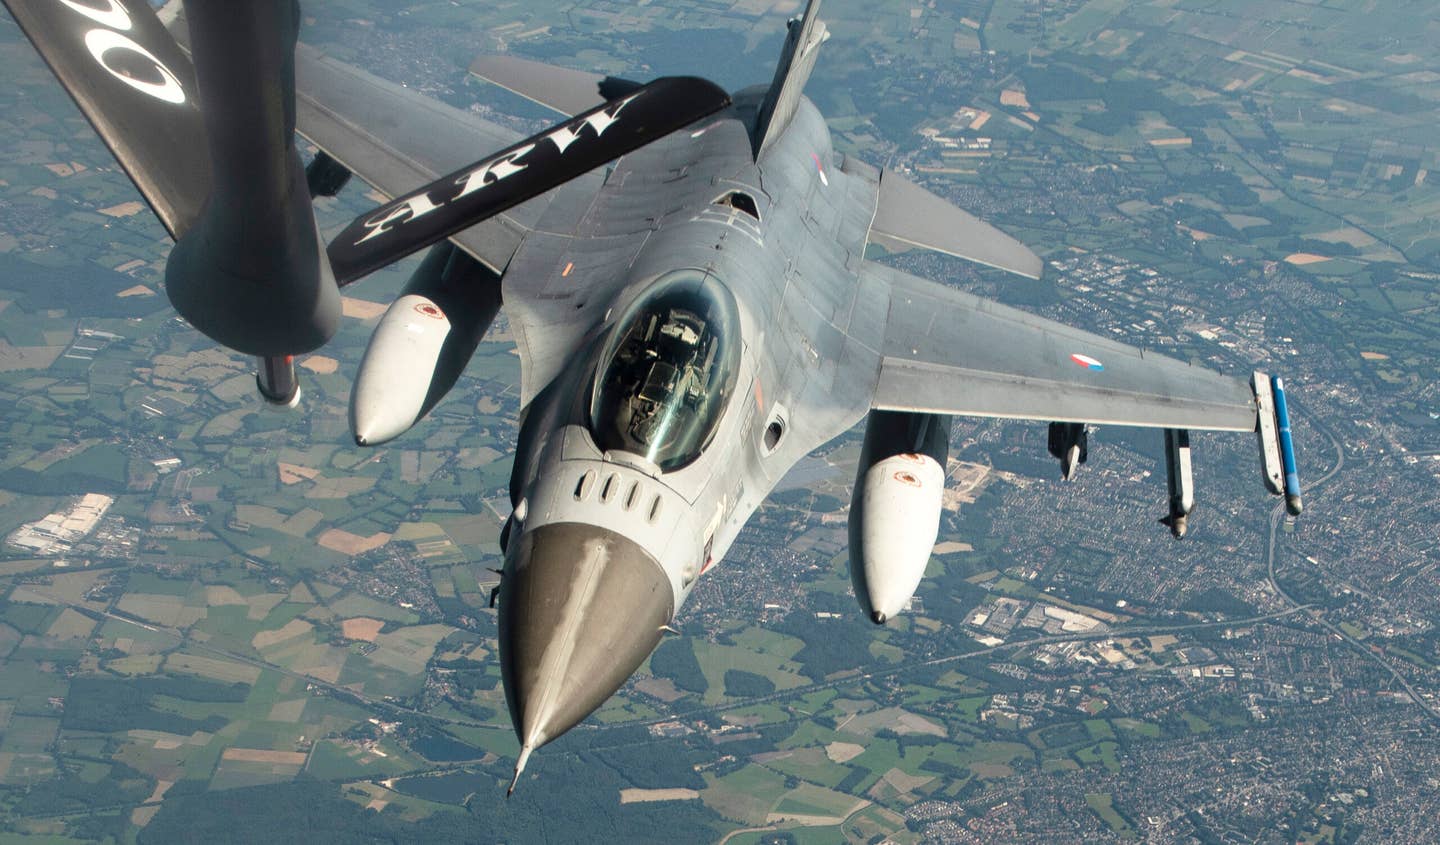 A Royal Netherlands Air Force F-16 approaches a U.S. Air Force KC-135 Stratotanker for refueling during a NATO exercise over Germany in 2020. <em>U.S. Air Force photo by Airman 1st Class Jessi Monte</em>